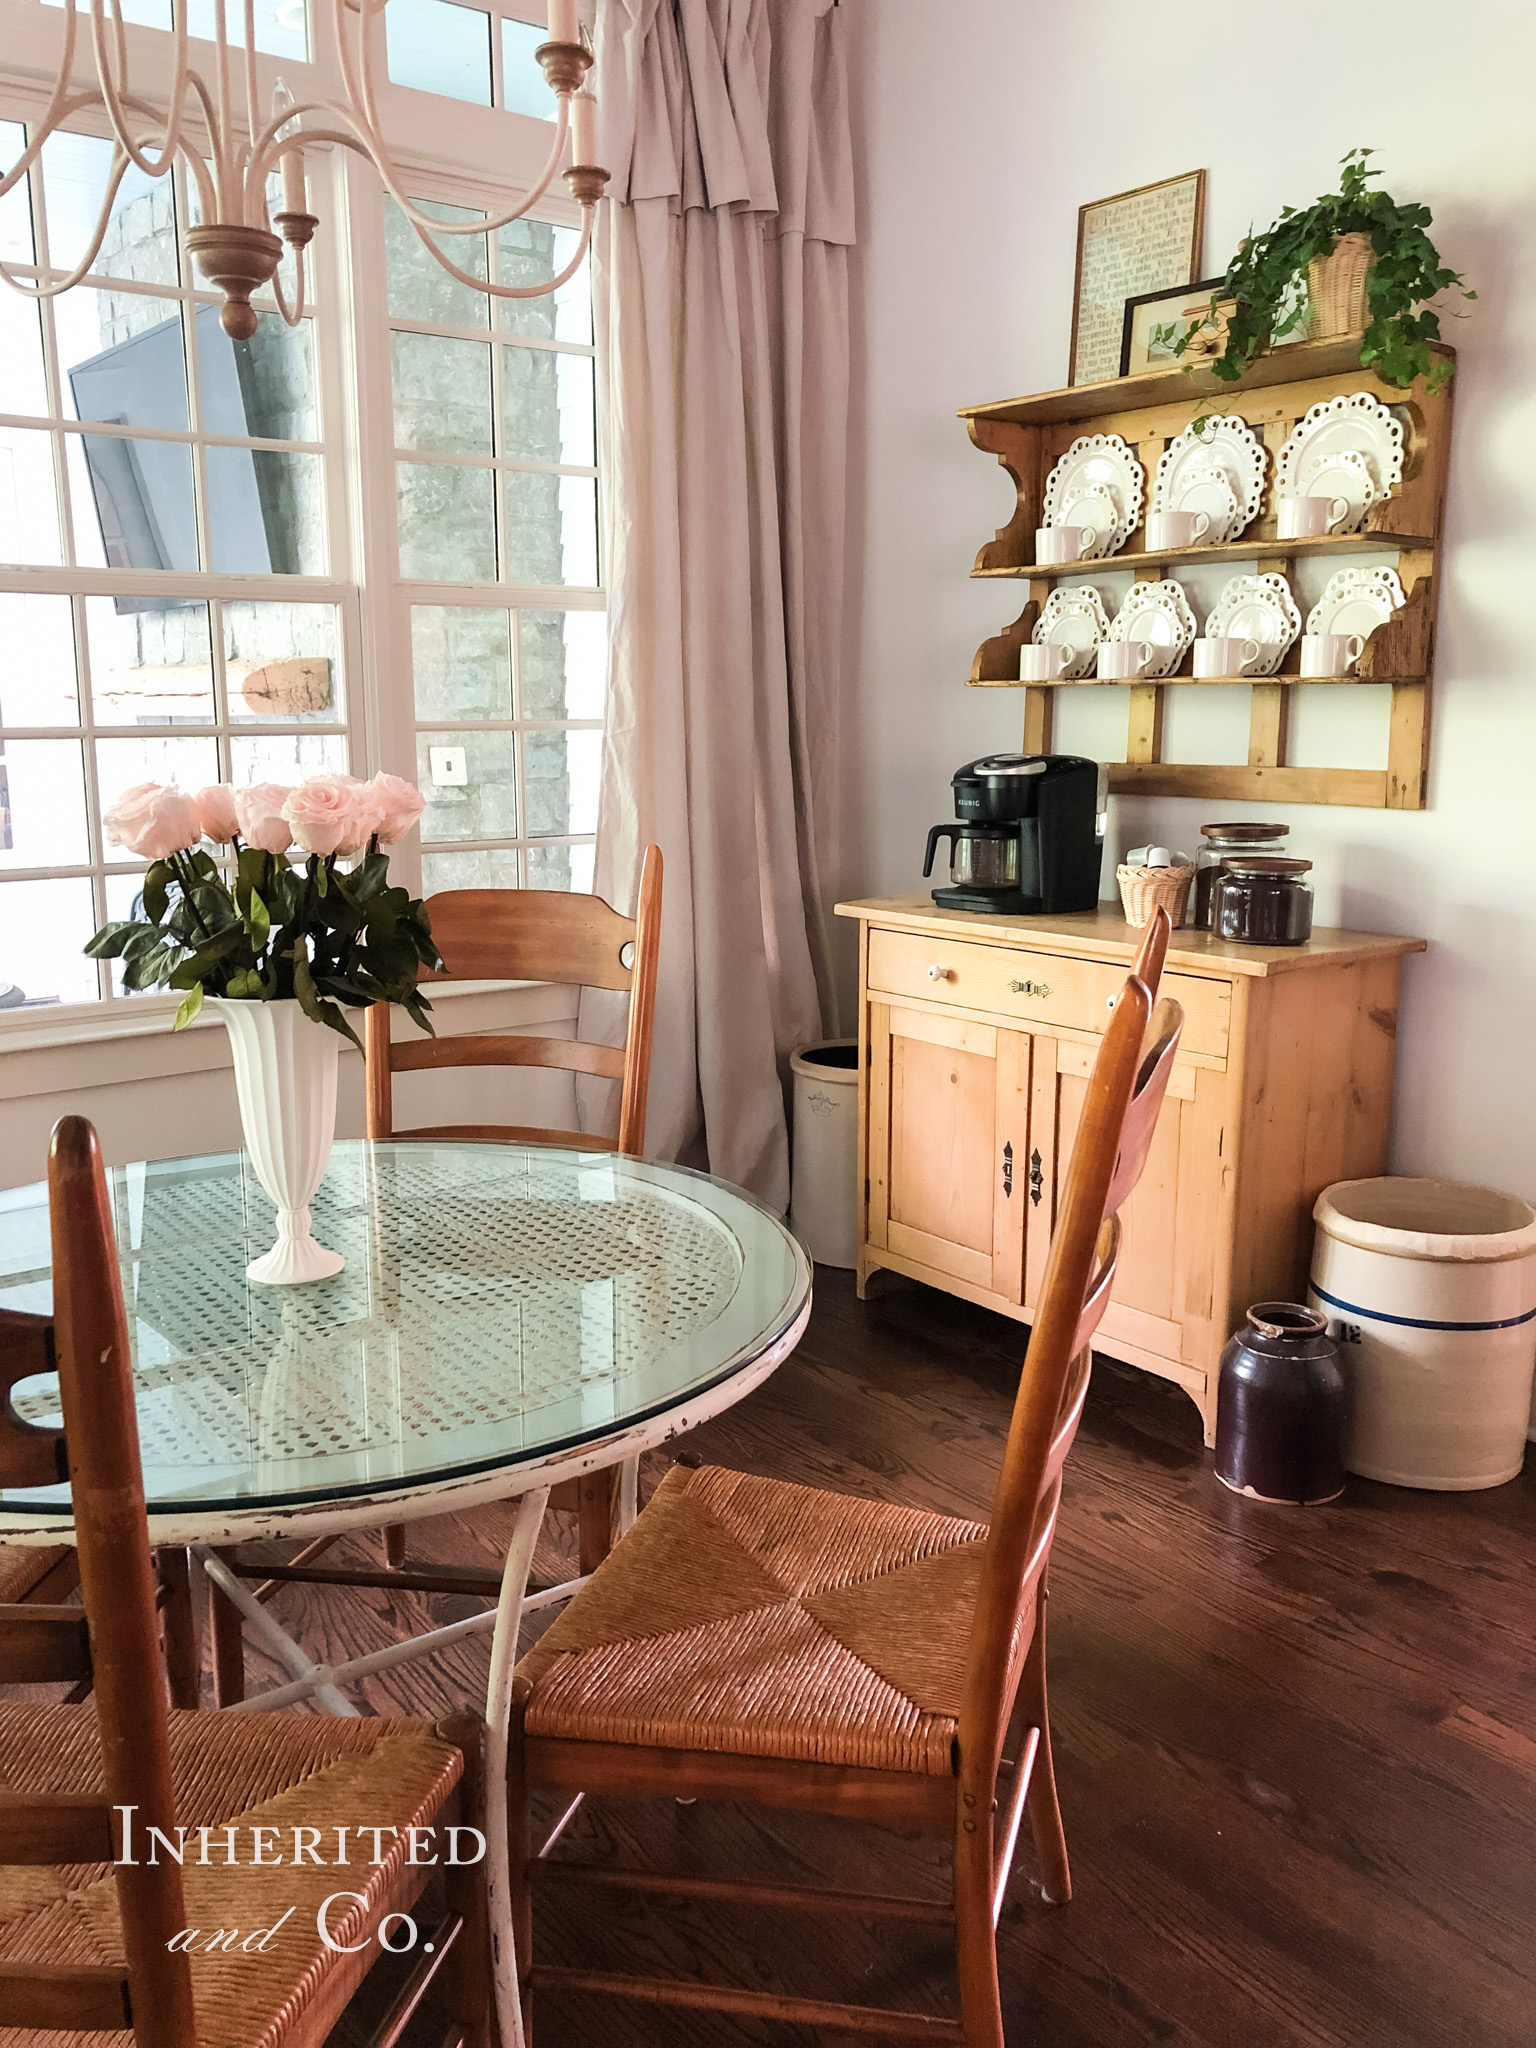 Antique-filled breakfast nook with home coffee bar